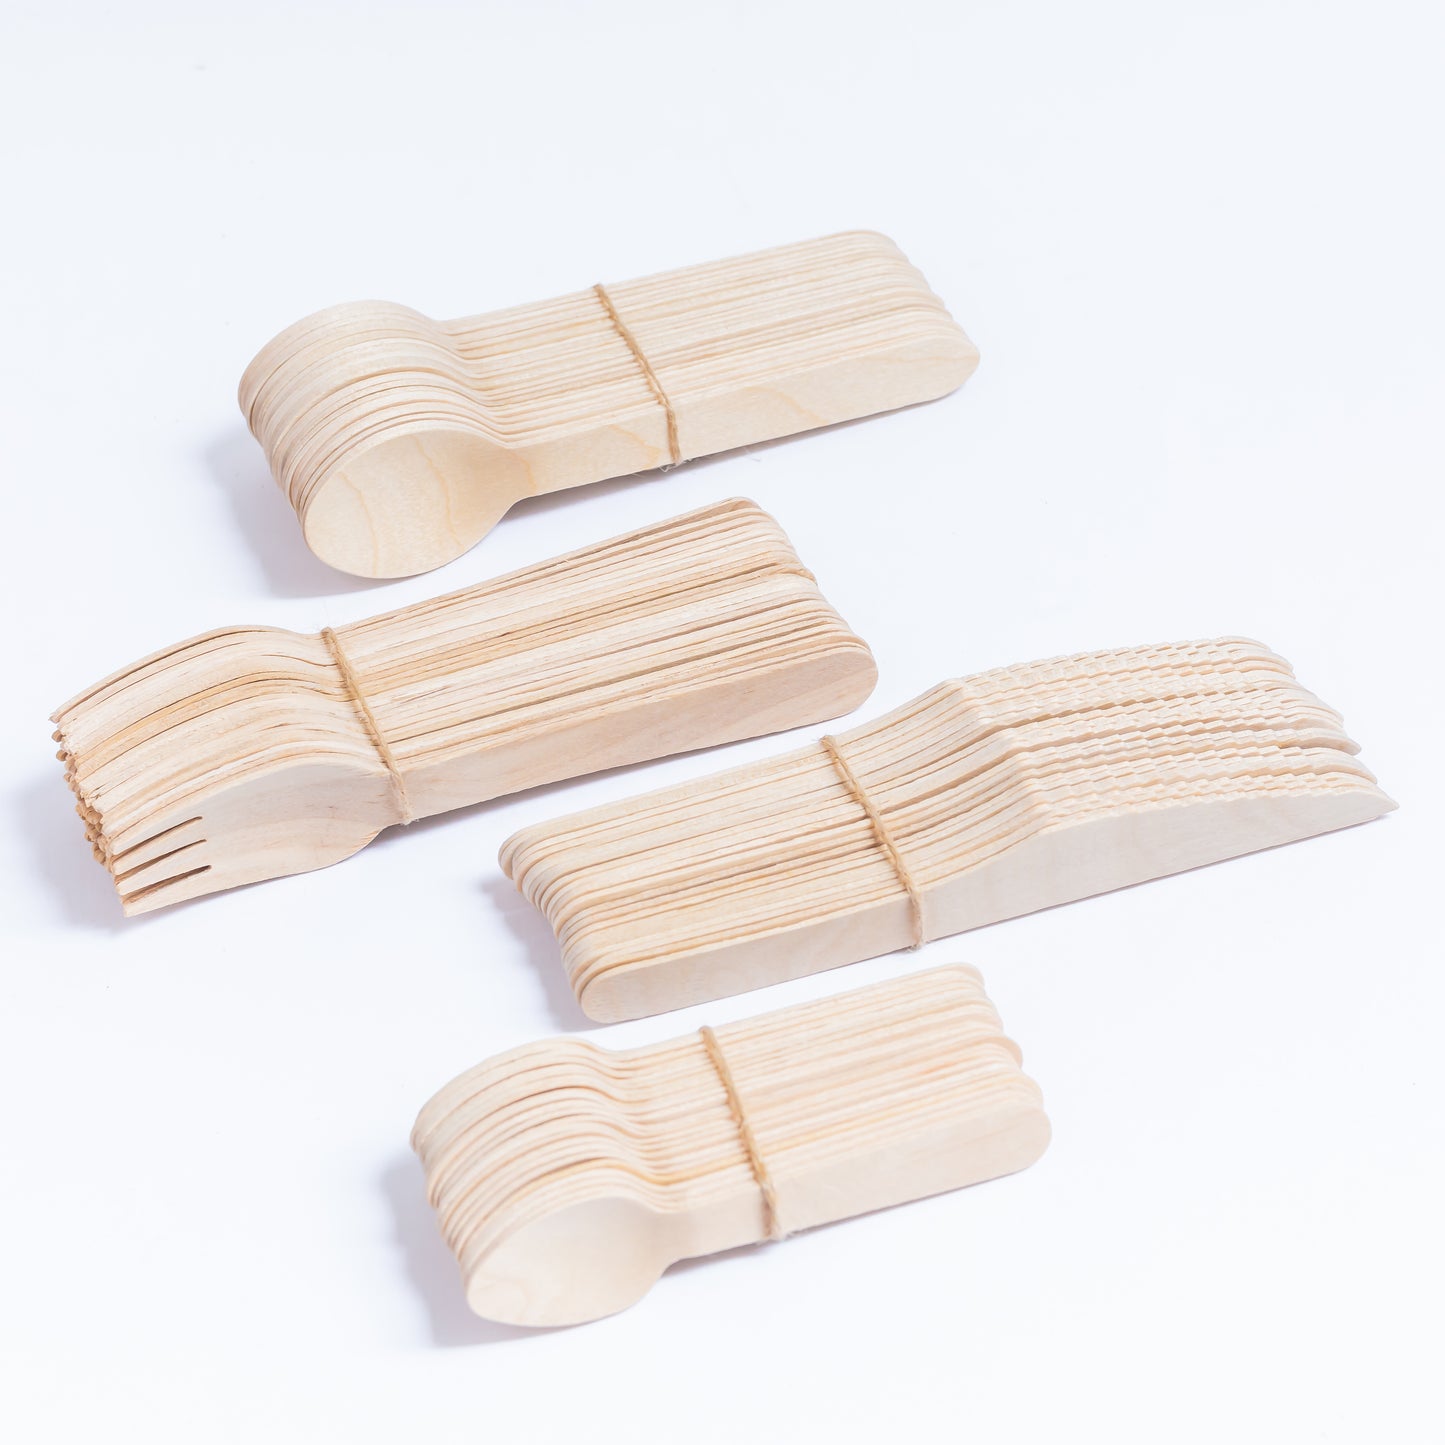 100 Piece Wooden Disposable Cutlery Set (25 x spoon, fork, knife, teaspoon) - Eco Leaf Products